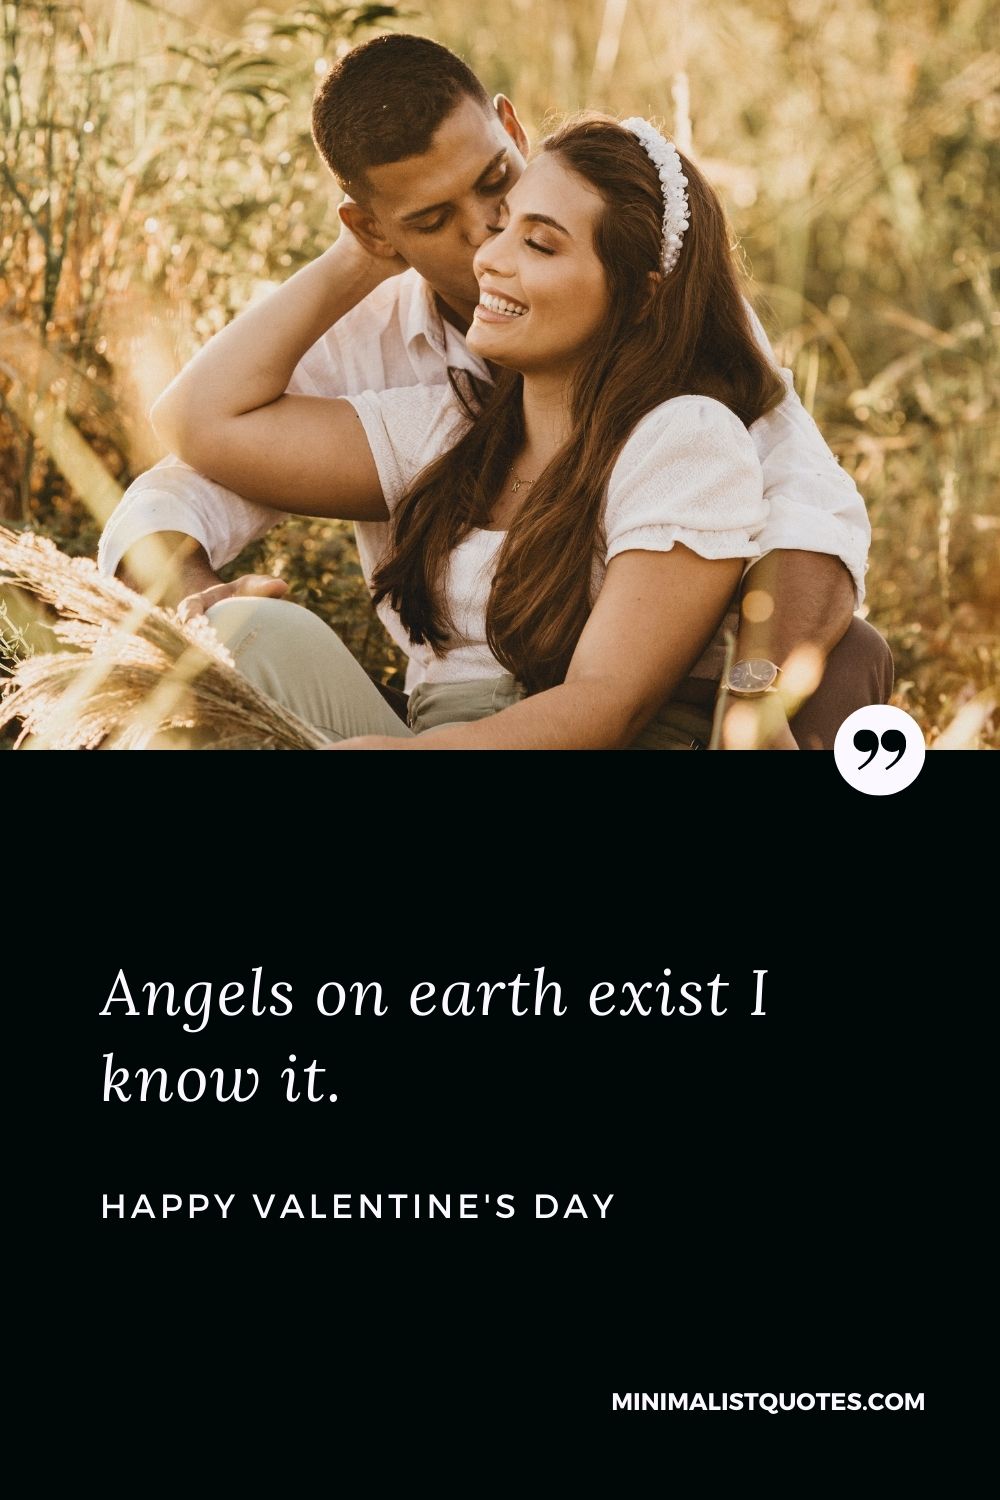 Valentine's Day wishes, messages & quotes with images: Angels on earth exist I know it. Happy Valentine's Day!